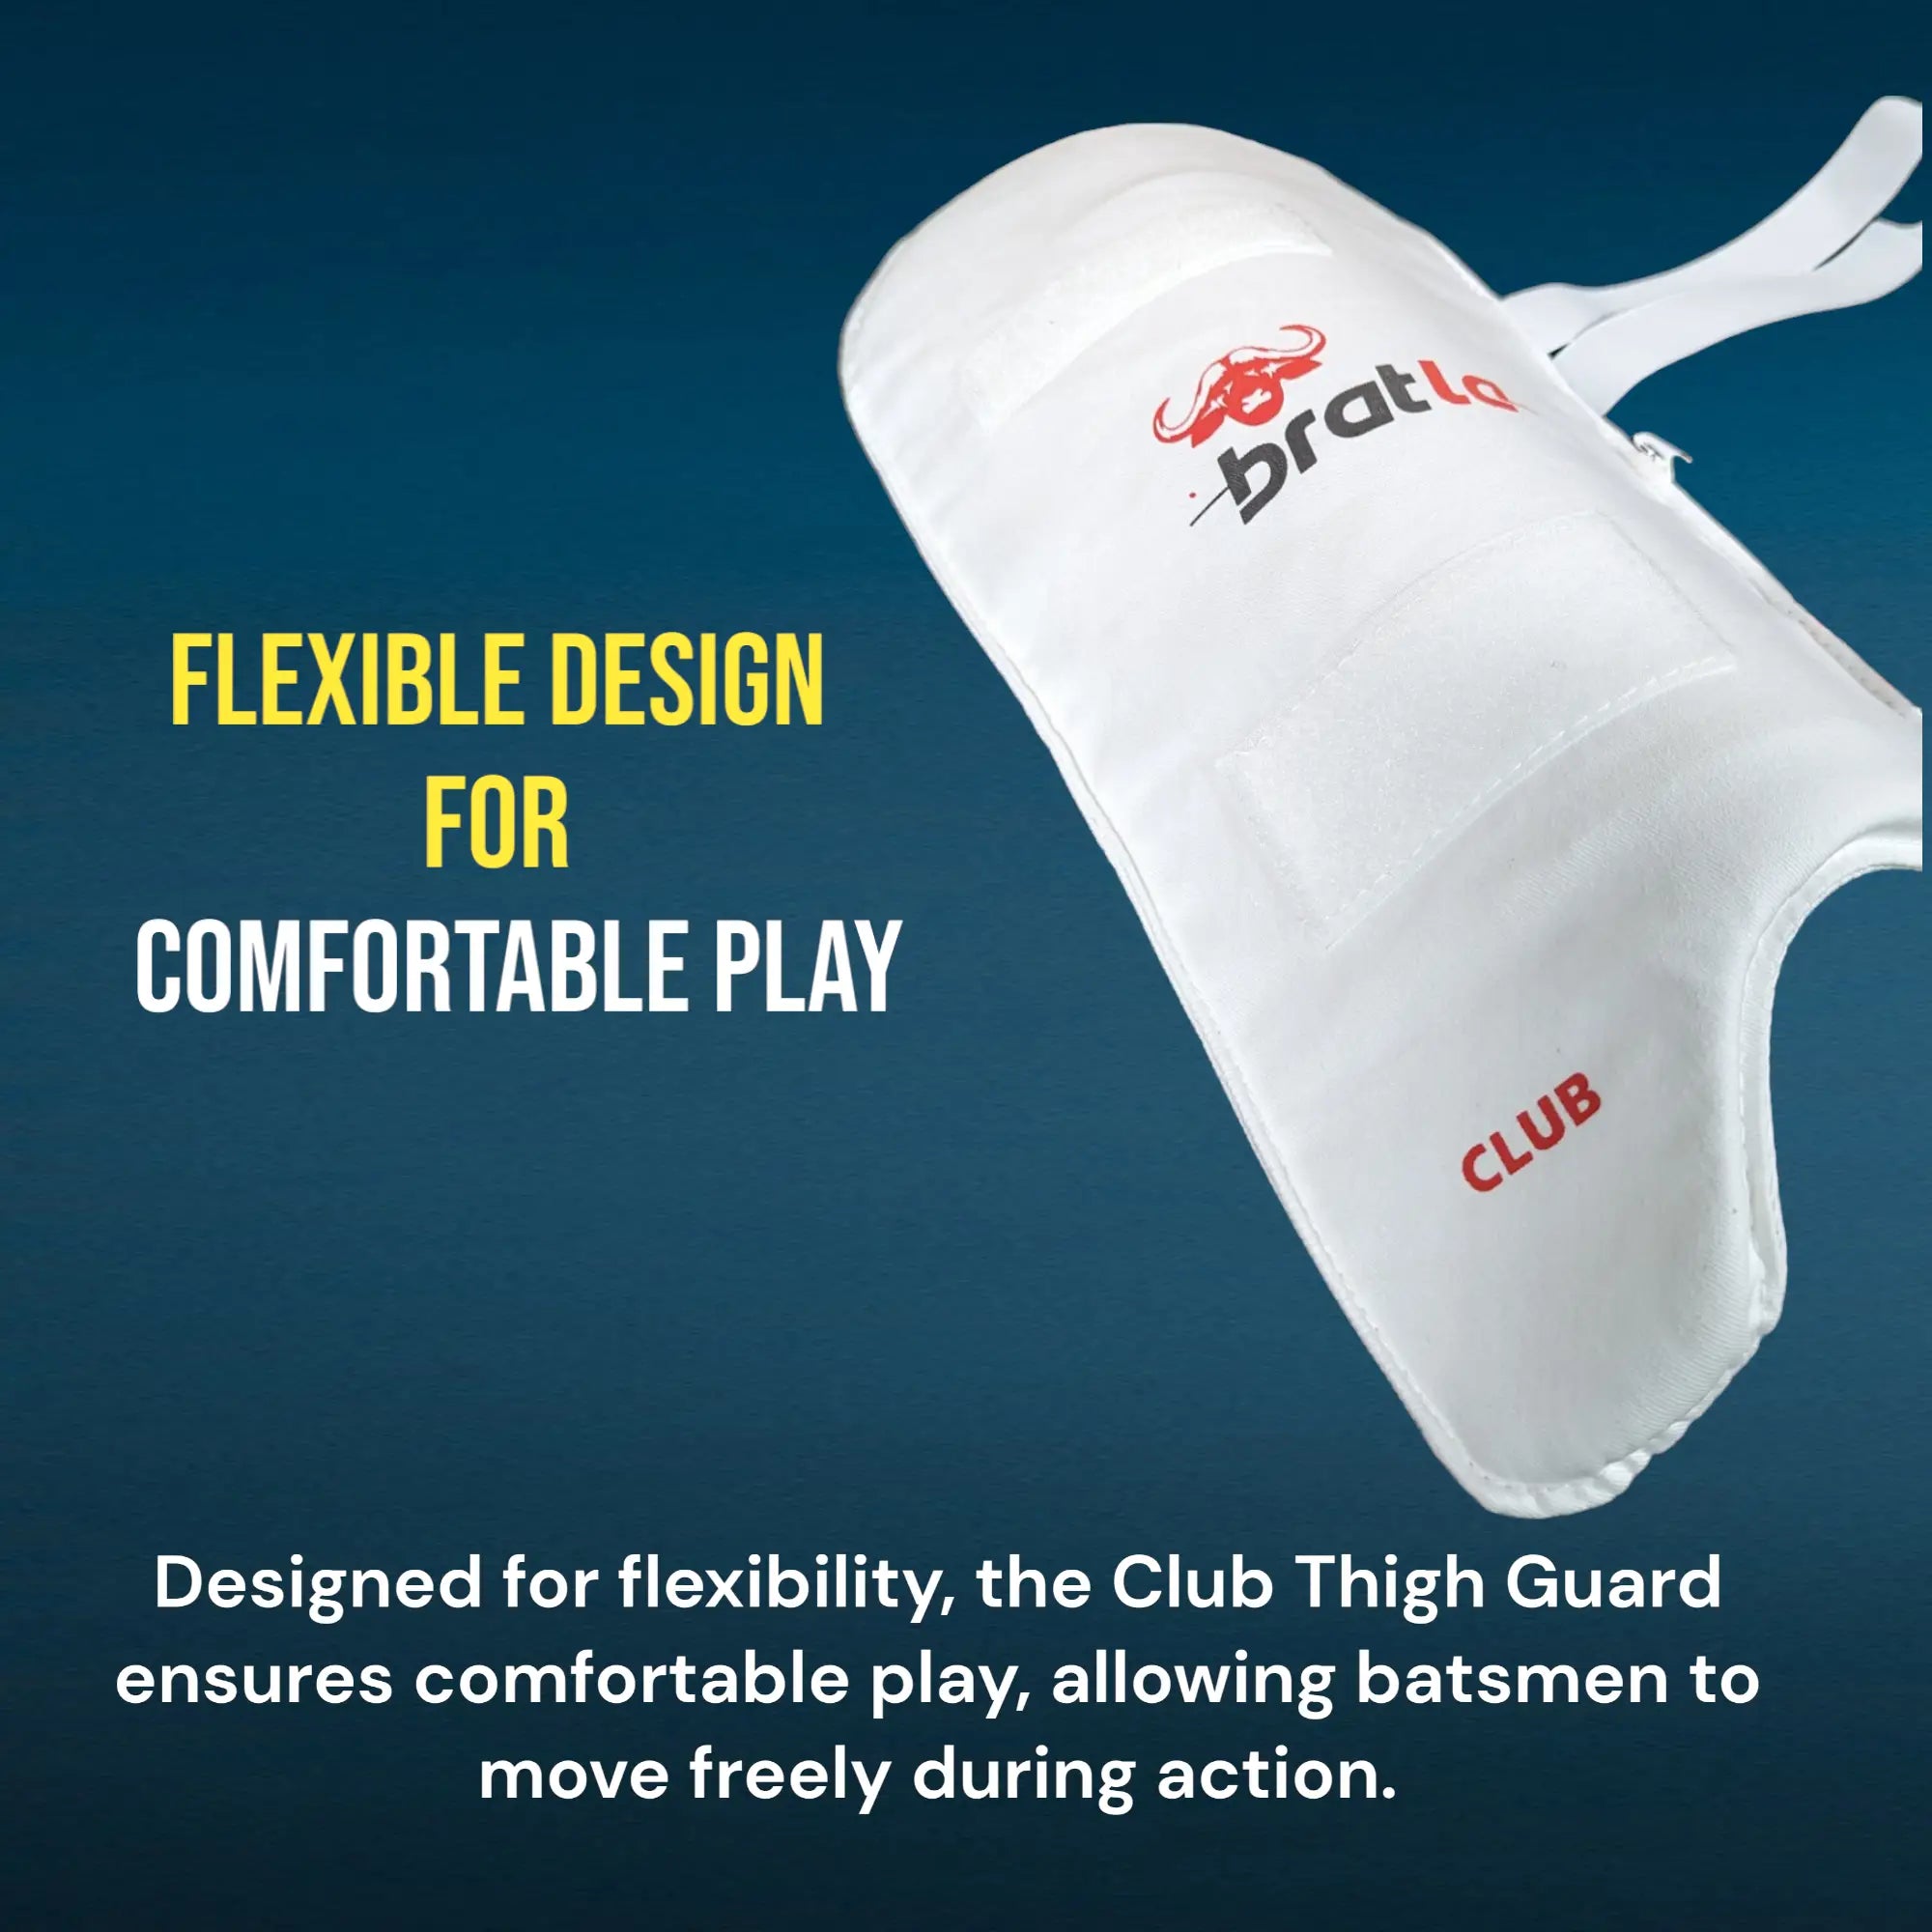 Cricket Club Thigh Pad Protector Foam Padded Super Lightweight - BODY PROTECTORS - THIGH GUARD